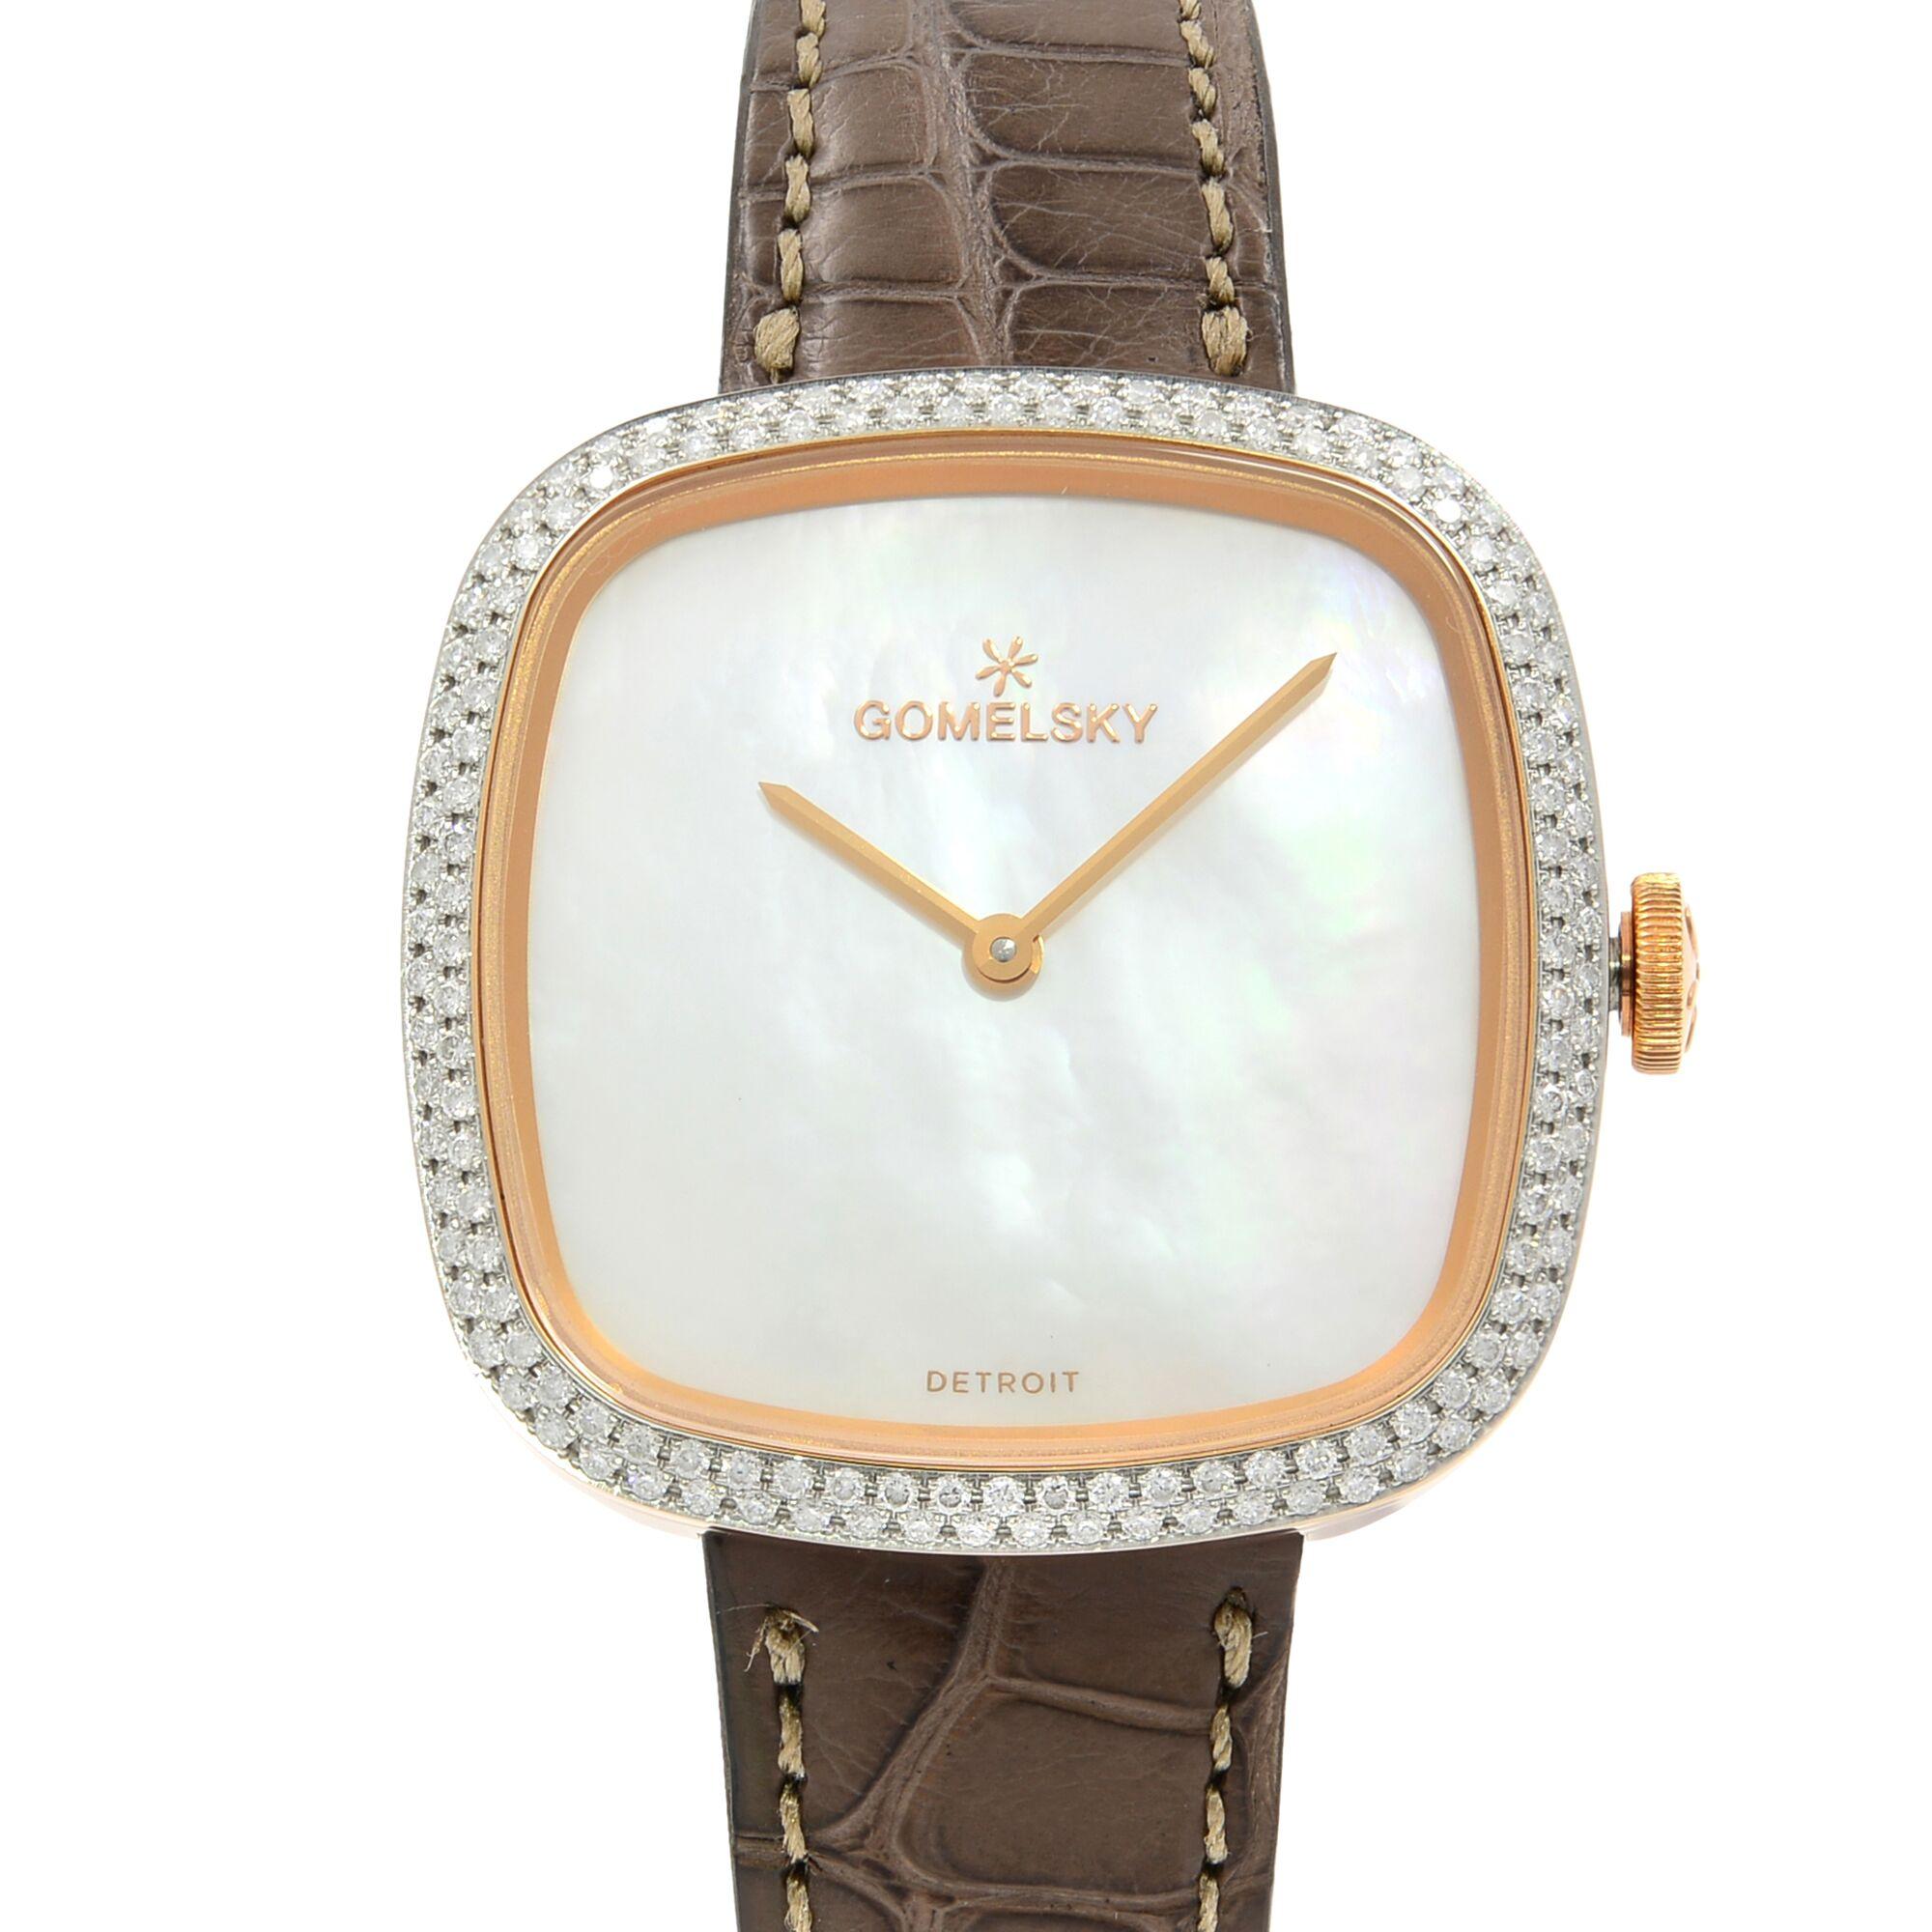 This brand new Gomelsky by Shinola Eppie Sneed G0120095033 is a beautiful Ladies timepiece that is powered by a quartz movement which is cased in a stainless steel case. It has a square shape face,  dial and has hand unspecified style markers. It is